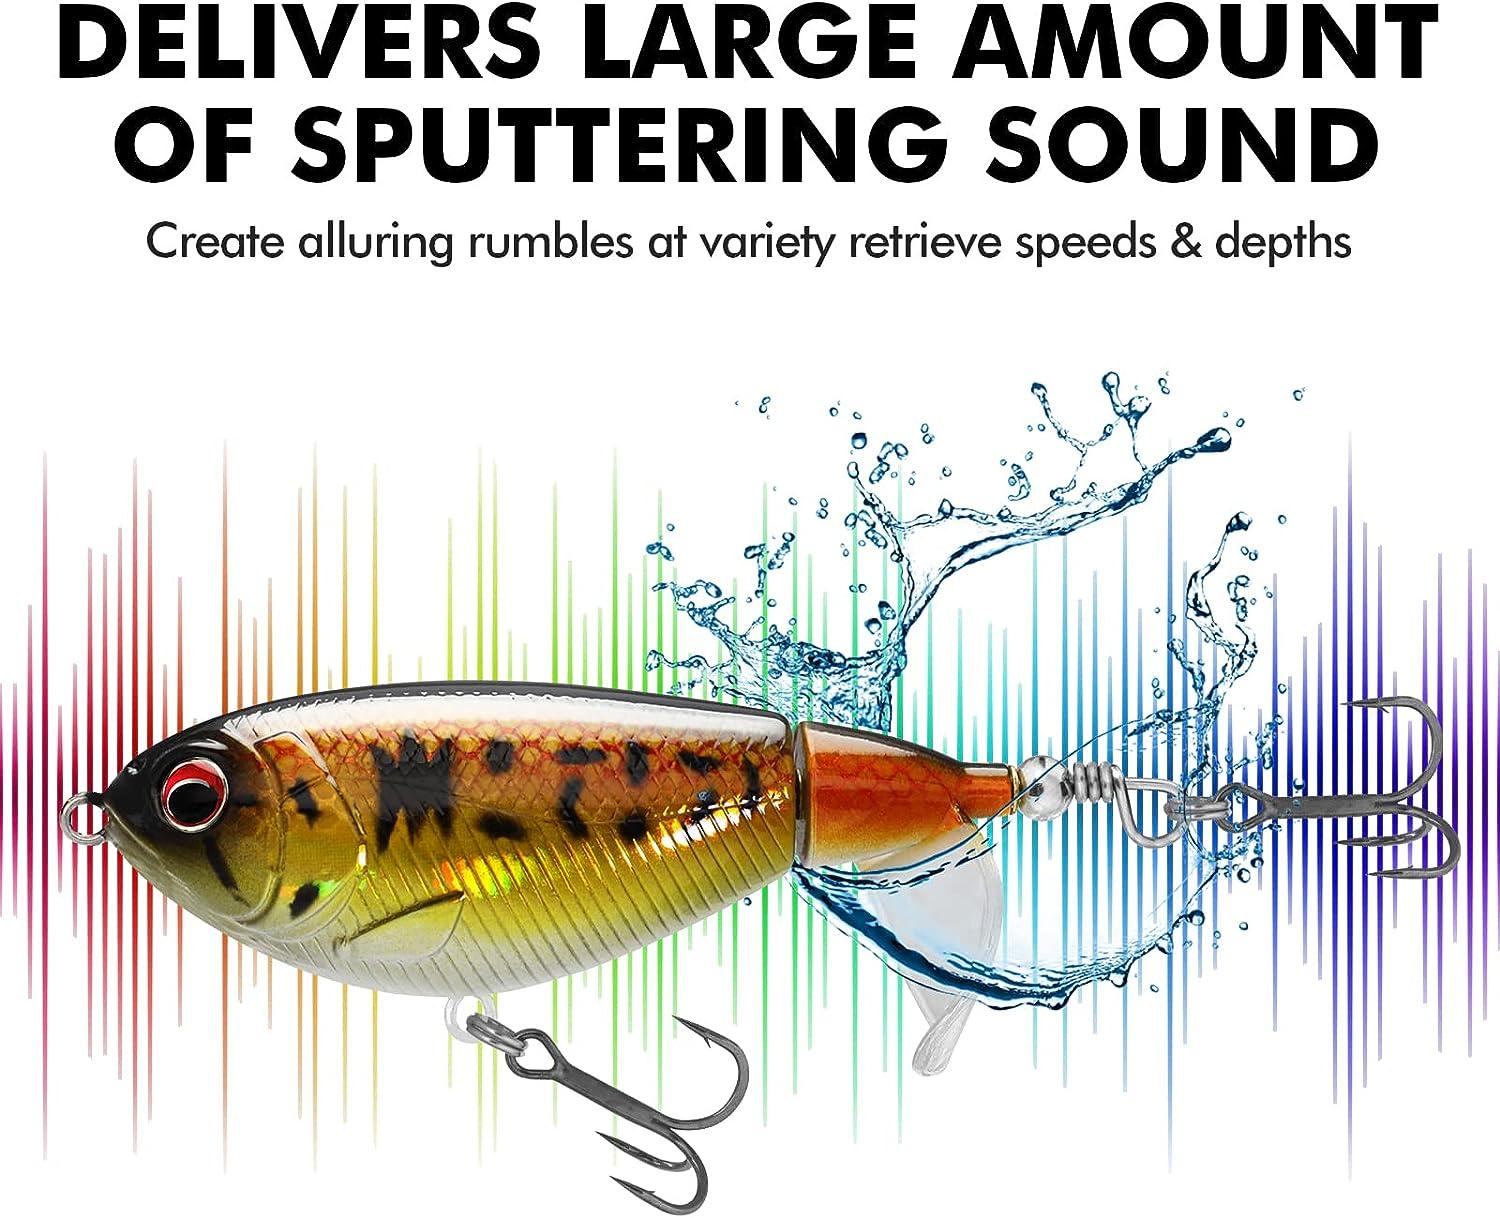 Fishing Lures with Hooks, Pencil Fishing Lures for Bass Catfish